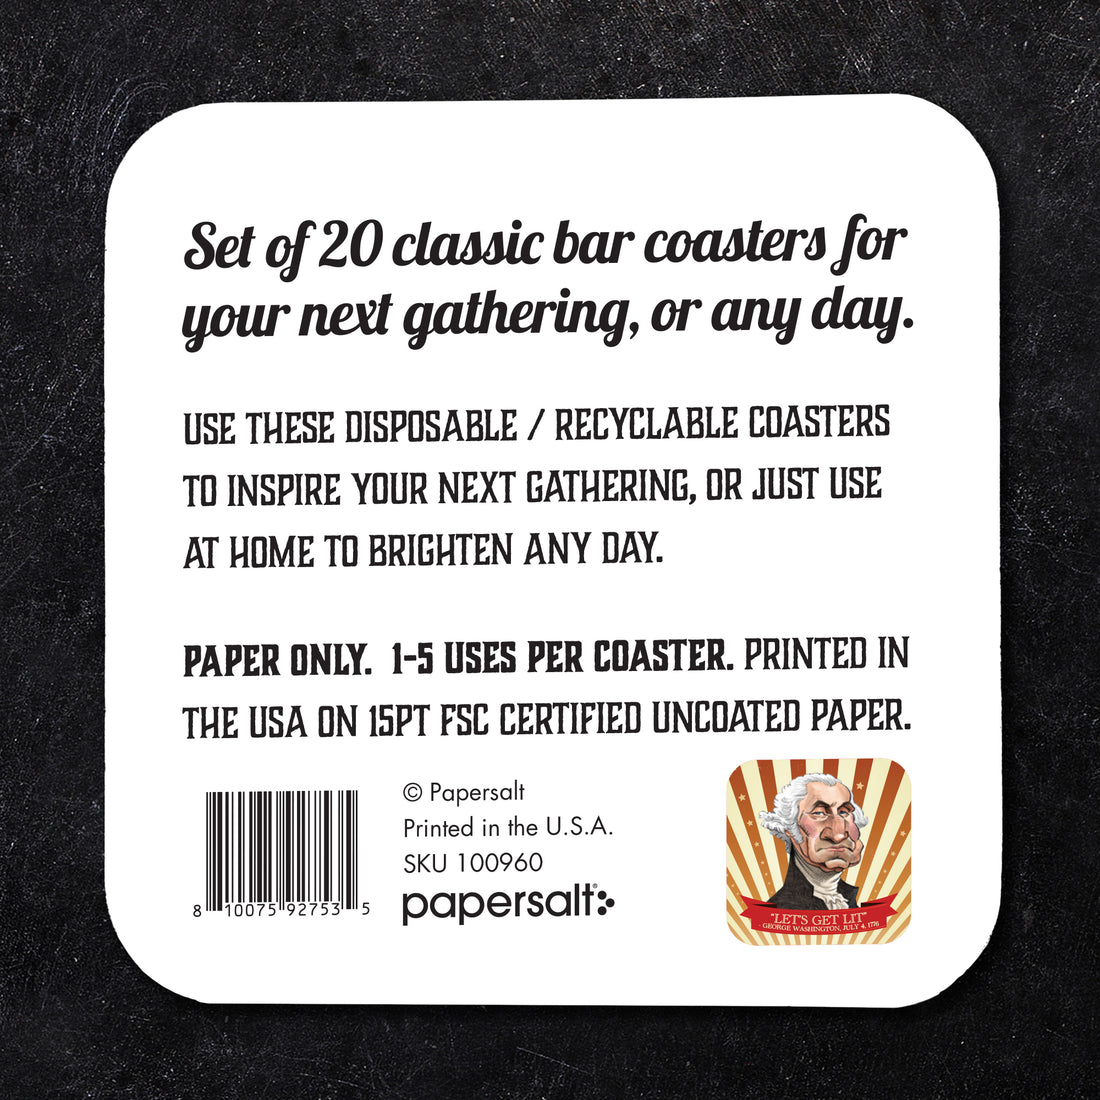 Coaster: Holiday, Let's Get Lit - Pack of 6